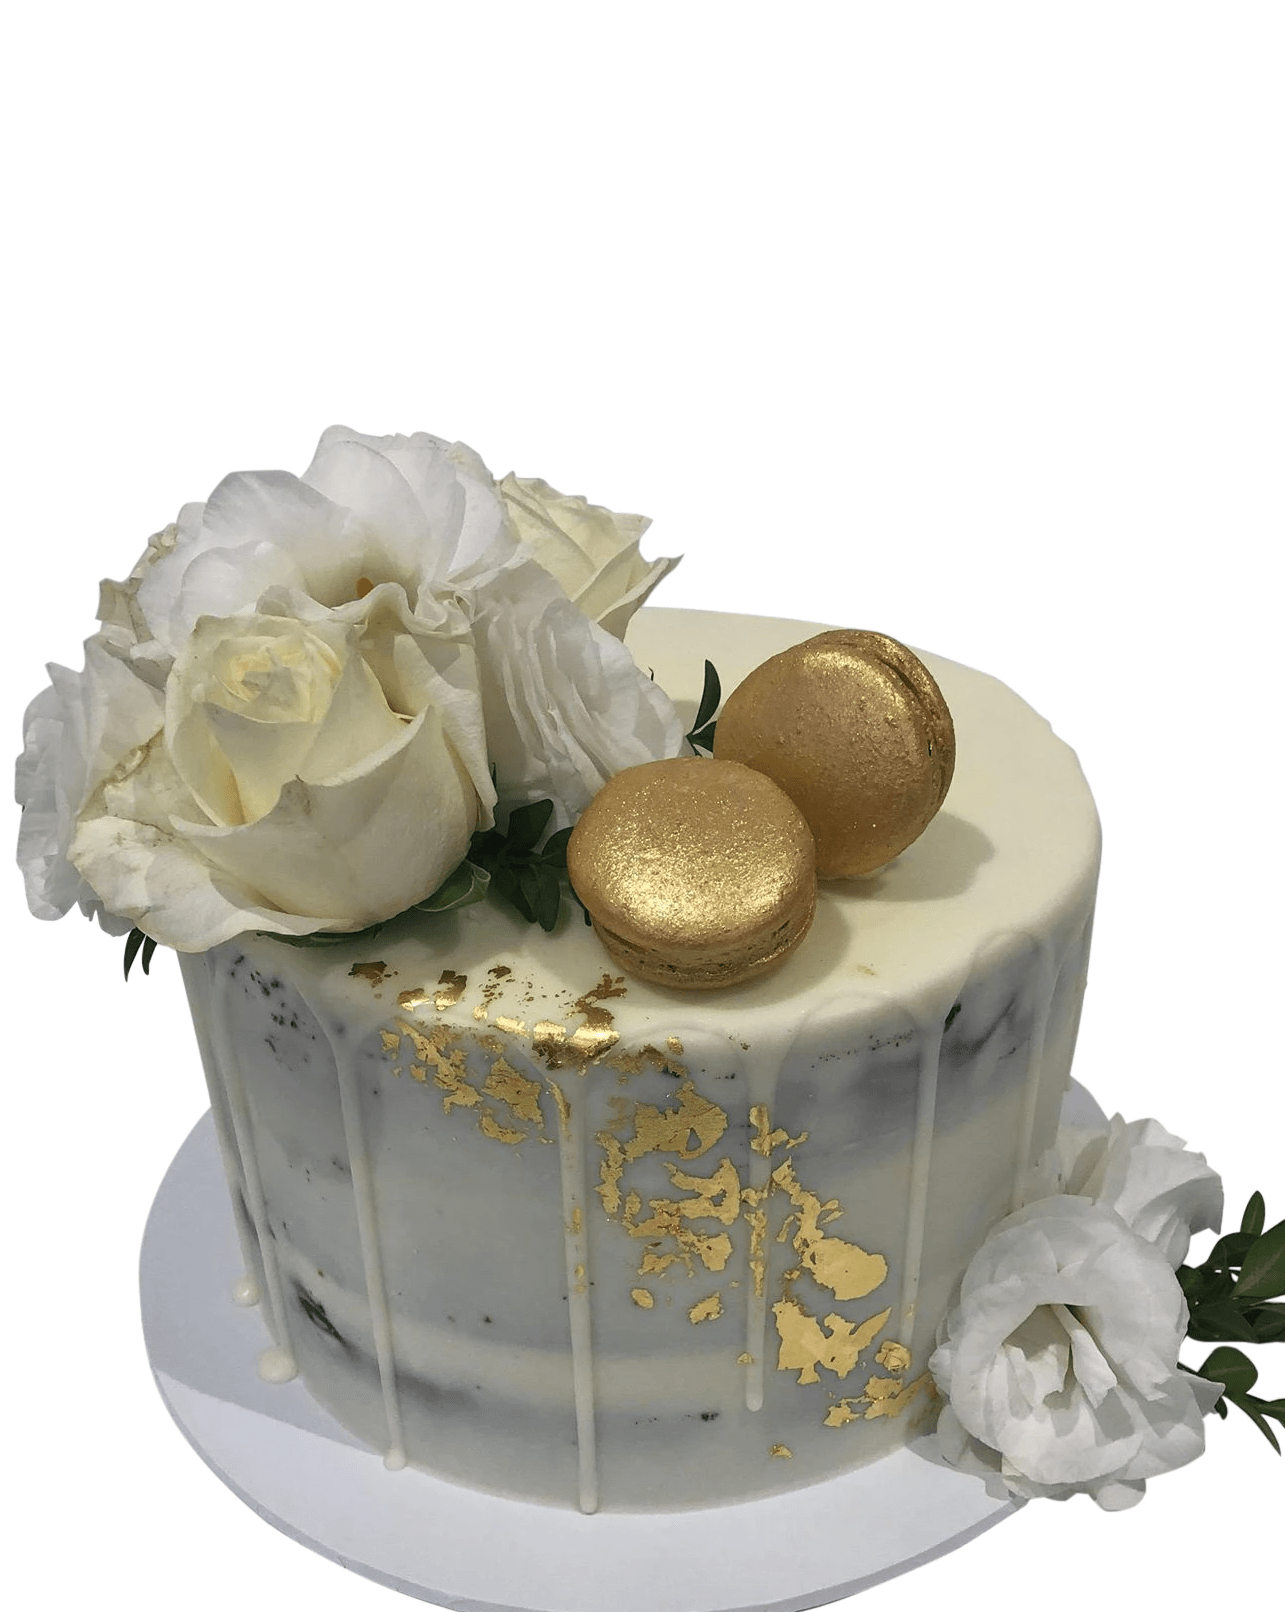 Cake Creations by Kate™ SpecialityCakes Classic White and Gold Floral Semi-Naked Speciality Cake